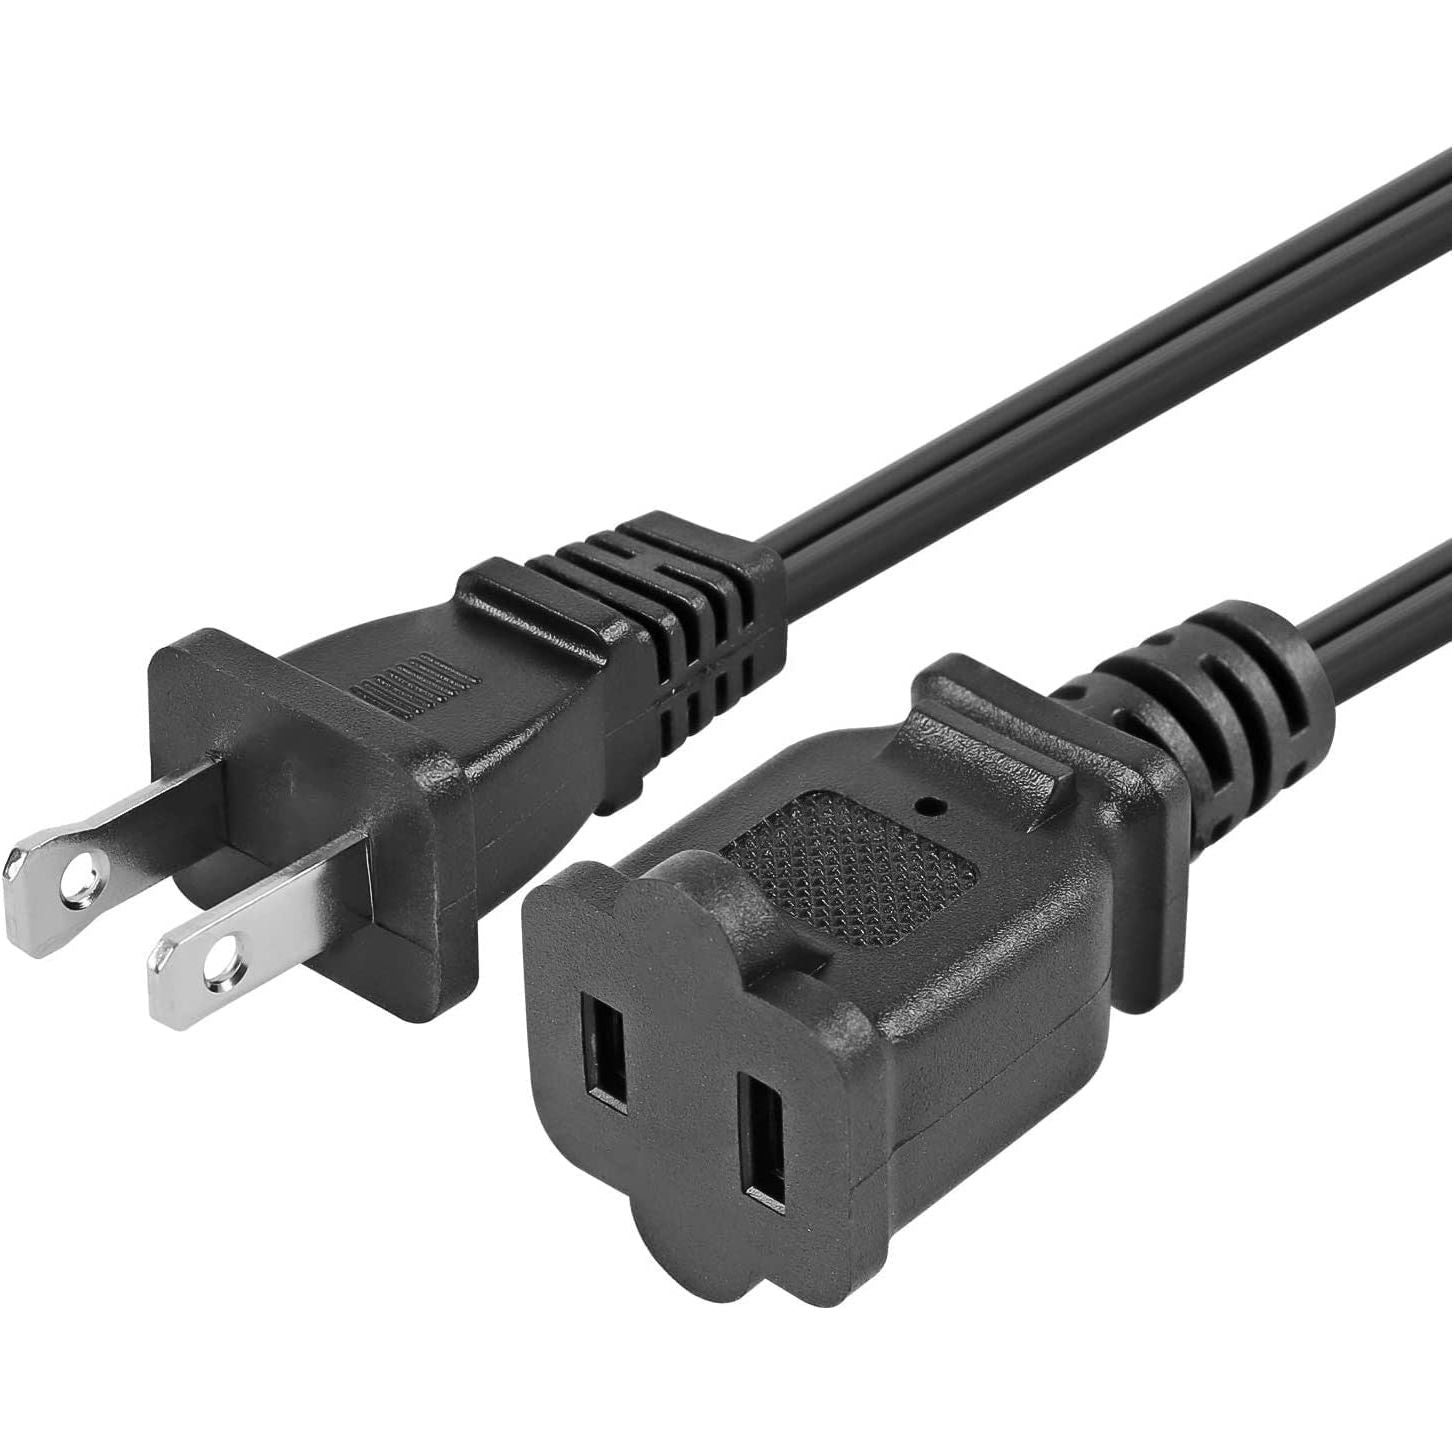 2-Prong Male-Female Extension Power Cord Cable; Outlet Extension Cable Cord US AC 2-Prong Male-Female Power Cable 13A/125V; Black 5 Core EXC BLK 12FT Moorescarts